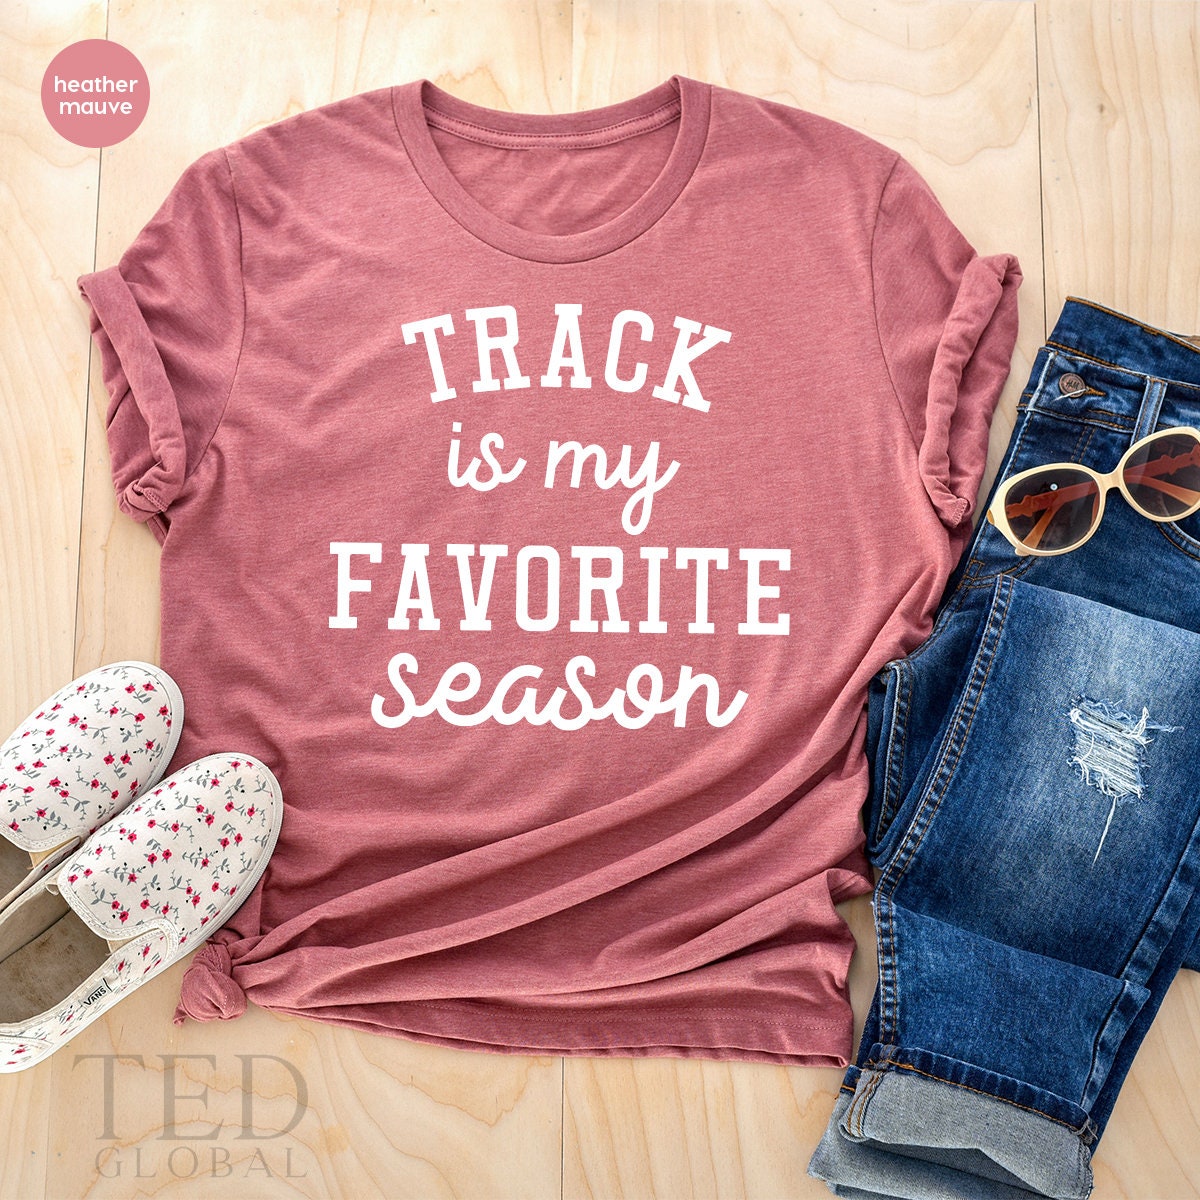 Track Team T-Shirt,Track Race Tshirt,Fathers Day T Shirt,Track Is My Favorite Season Tee,Track Lovers Gift Idea,Tracker Dad Clothing - Fastdeliverytees.com